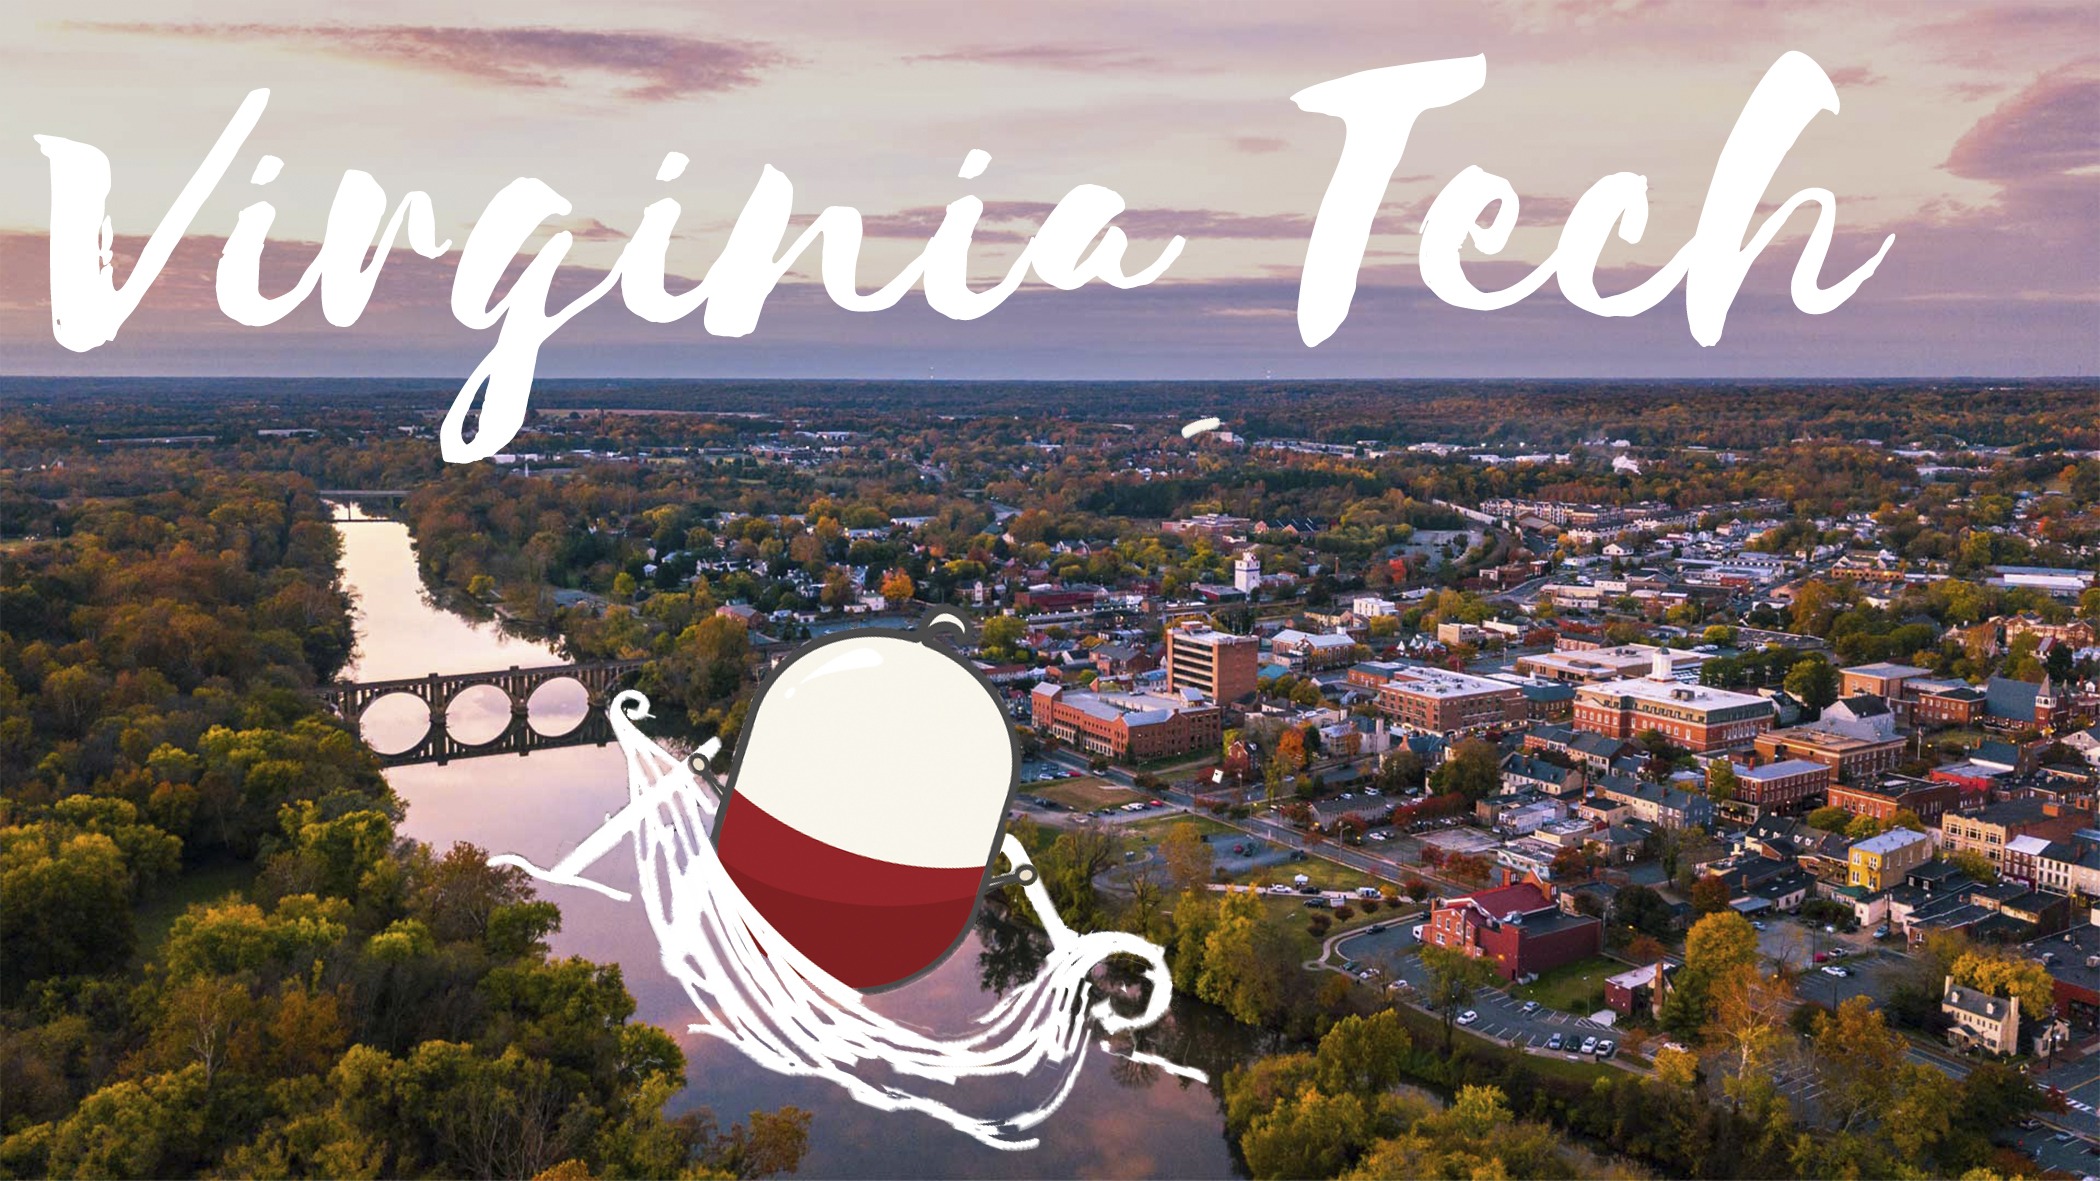 Virginia Tech waiver banner/featured image